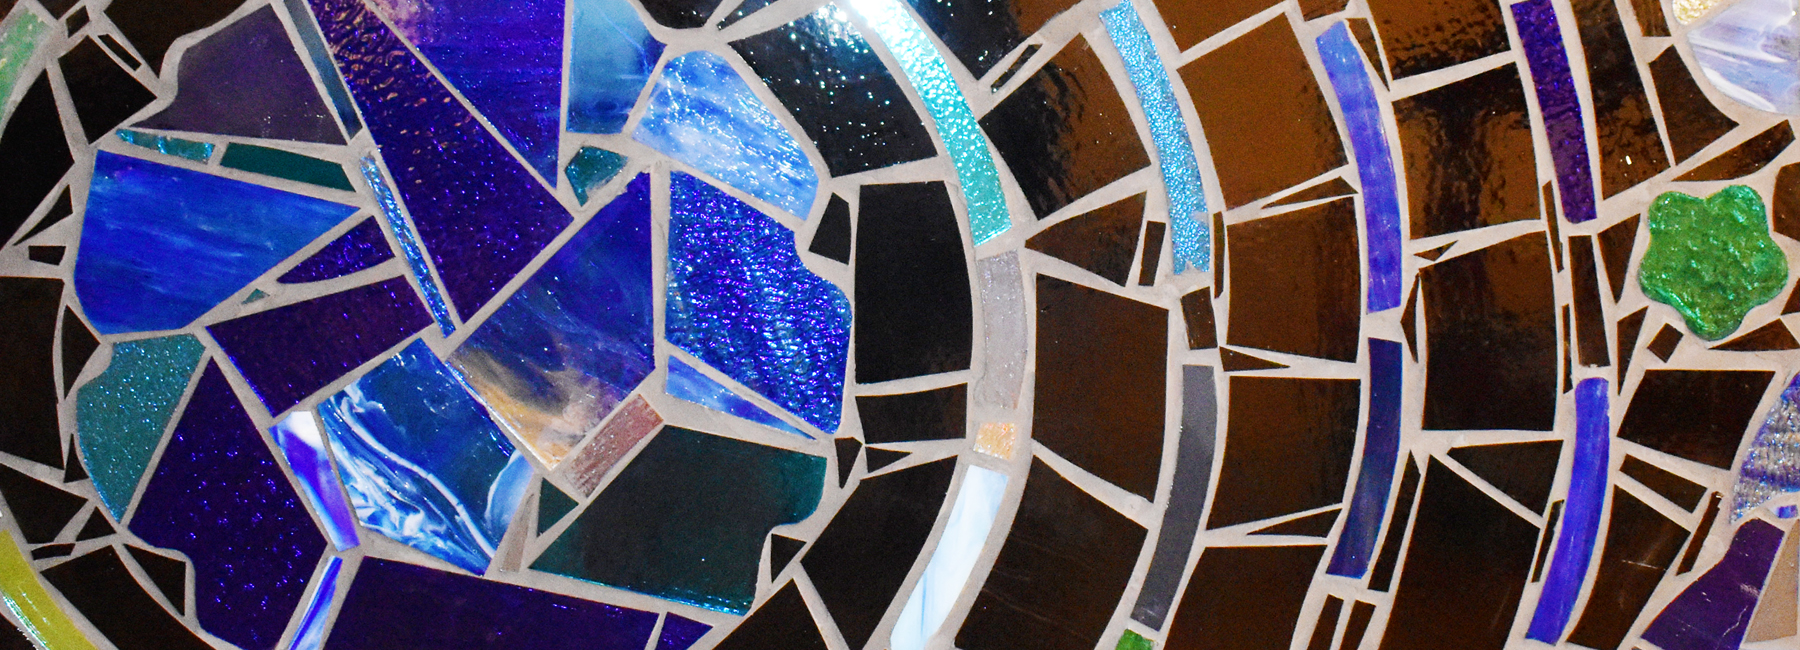 A close-up shot of a stained-glass mosaic with green, blue, and clear tiles.